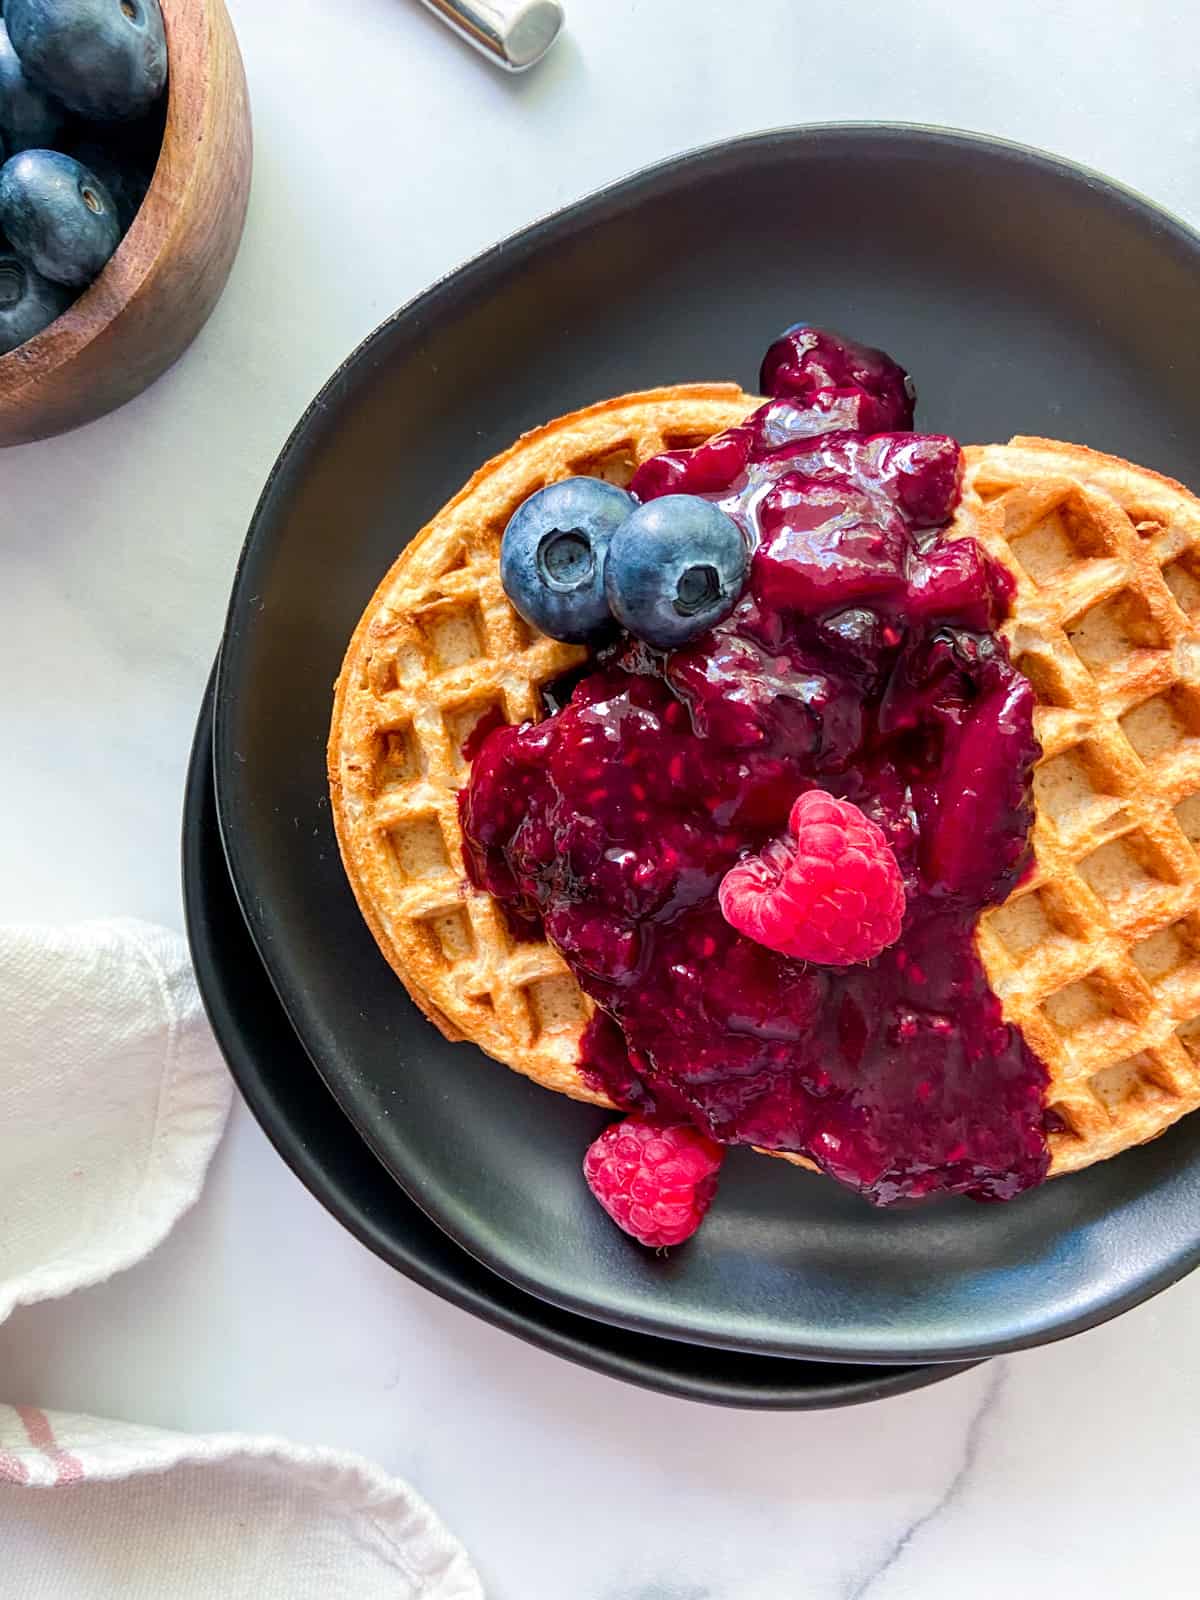 Waffles topped with mixed berry compote and fresh berries.